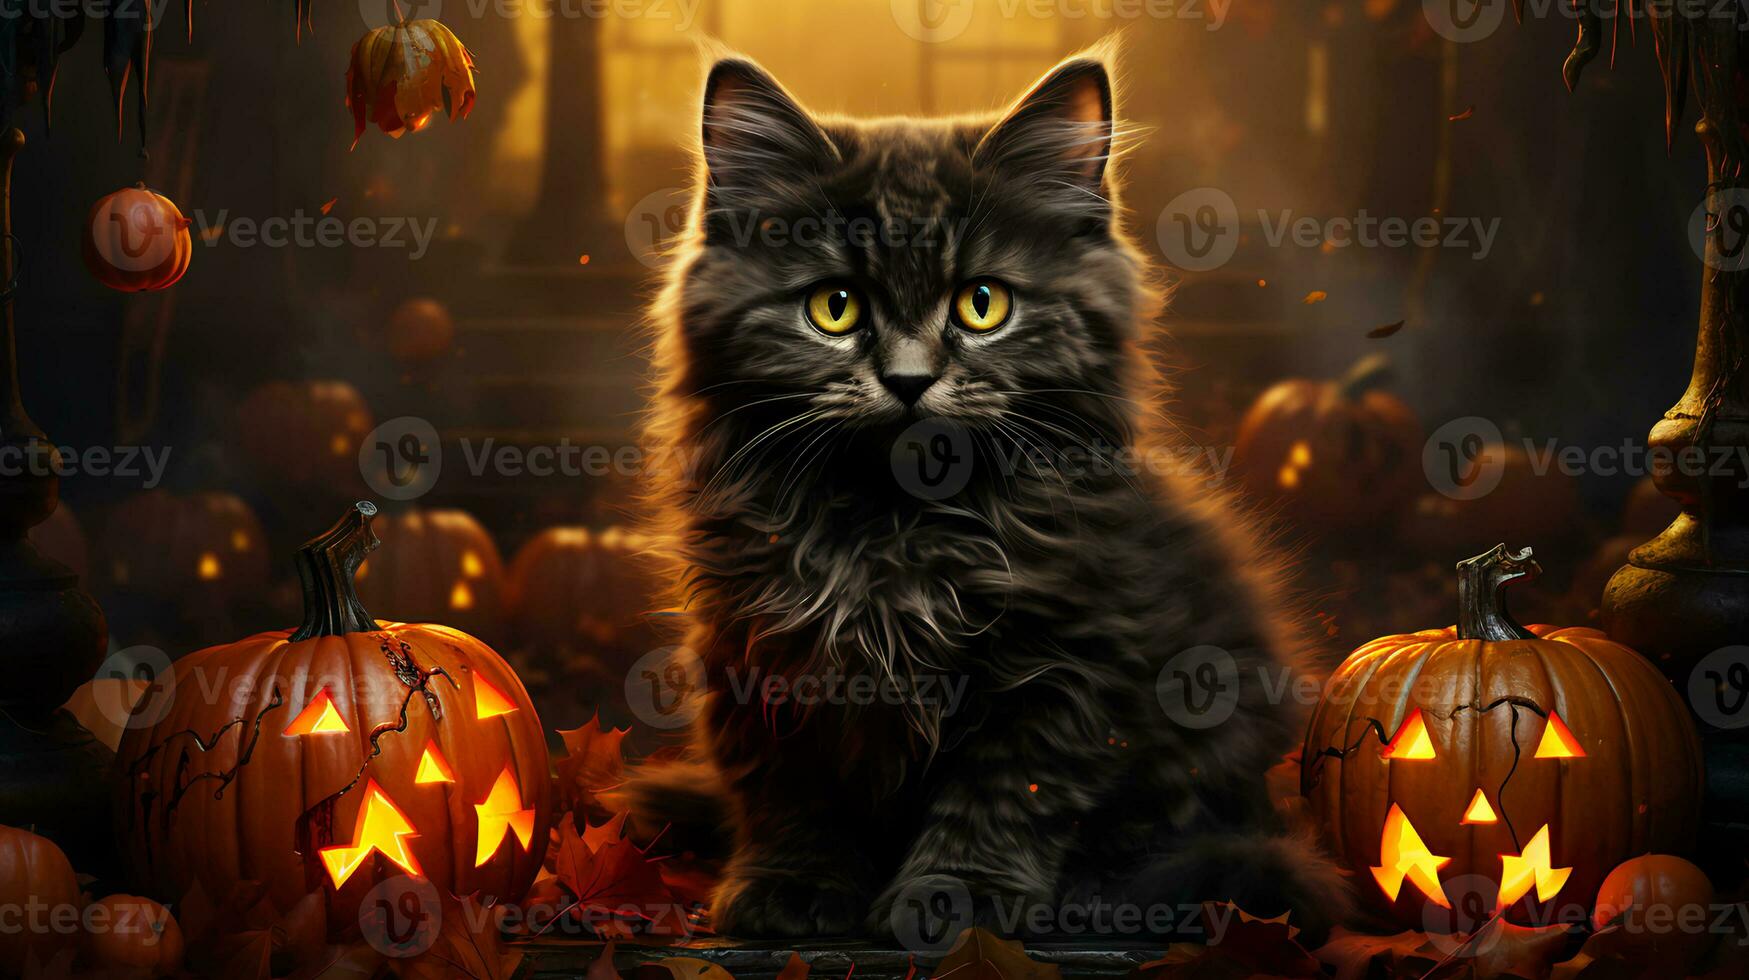 Black cat and scary Halloween decorations photo